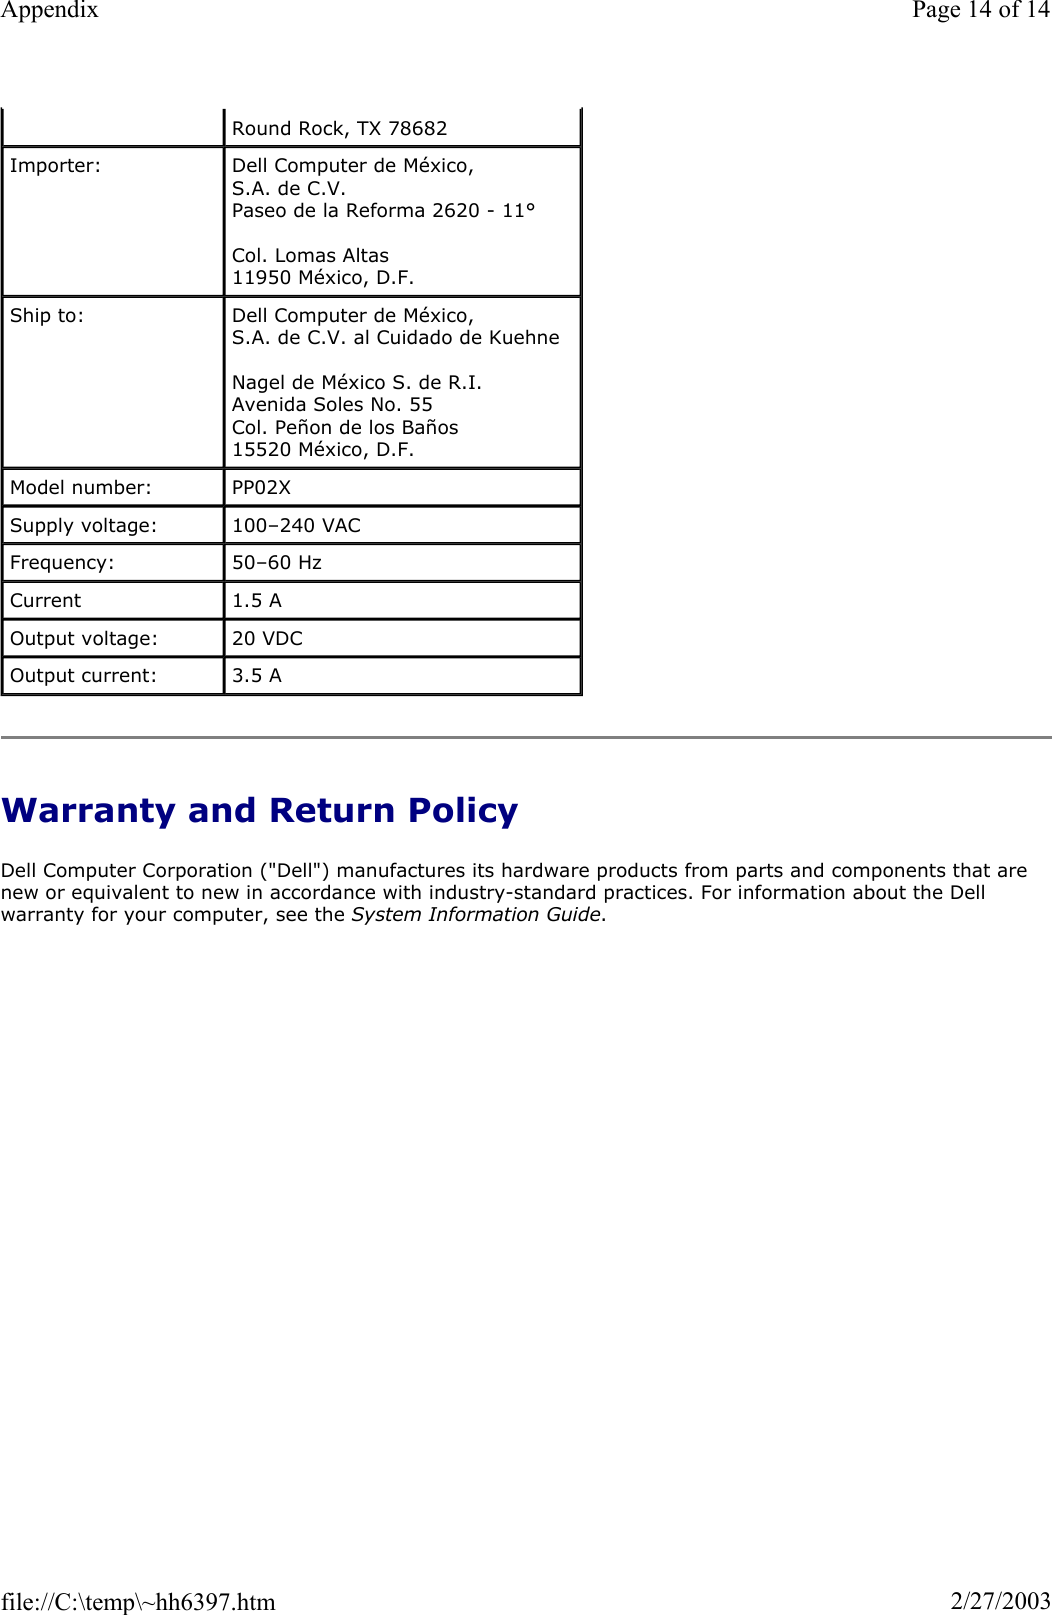 Warranty and Return Policy Dell Computer Corporation (&quot;Dell&quot;) manufactures its hardware products from parts and components that are new or equivalent to new in accordance with industry-standard practices. For information about the Dell warranty for your computer, see the System Information Guide.Round Rock, TX 78682 Importer:  Dell Computer de México,  S.A. de C.V.  Paseo de la Reforma 2620 - 11° Col. Lomas Altas  11950 México, D.F.  Ship to:  Dell Computer de México,  S.A. de C.V. al Cuidado de Kuehne Nagel de México S. de R.I. Avenida Soles No. 55 Col. Peñon de los Baños 15520 México, D.F. Model number:  PP02X Supply voltage:  100–240 VAC Frequency:  50–60 Hz Current  1.5 A Output voltage:  20 VDC Output current:  3.5 A Page 14 of 14Appendix2/27/2003file://C:\temp\~hh6397.htm